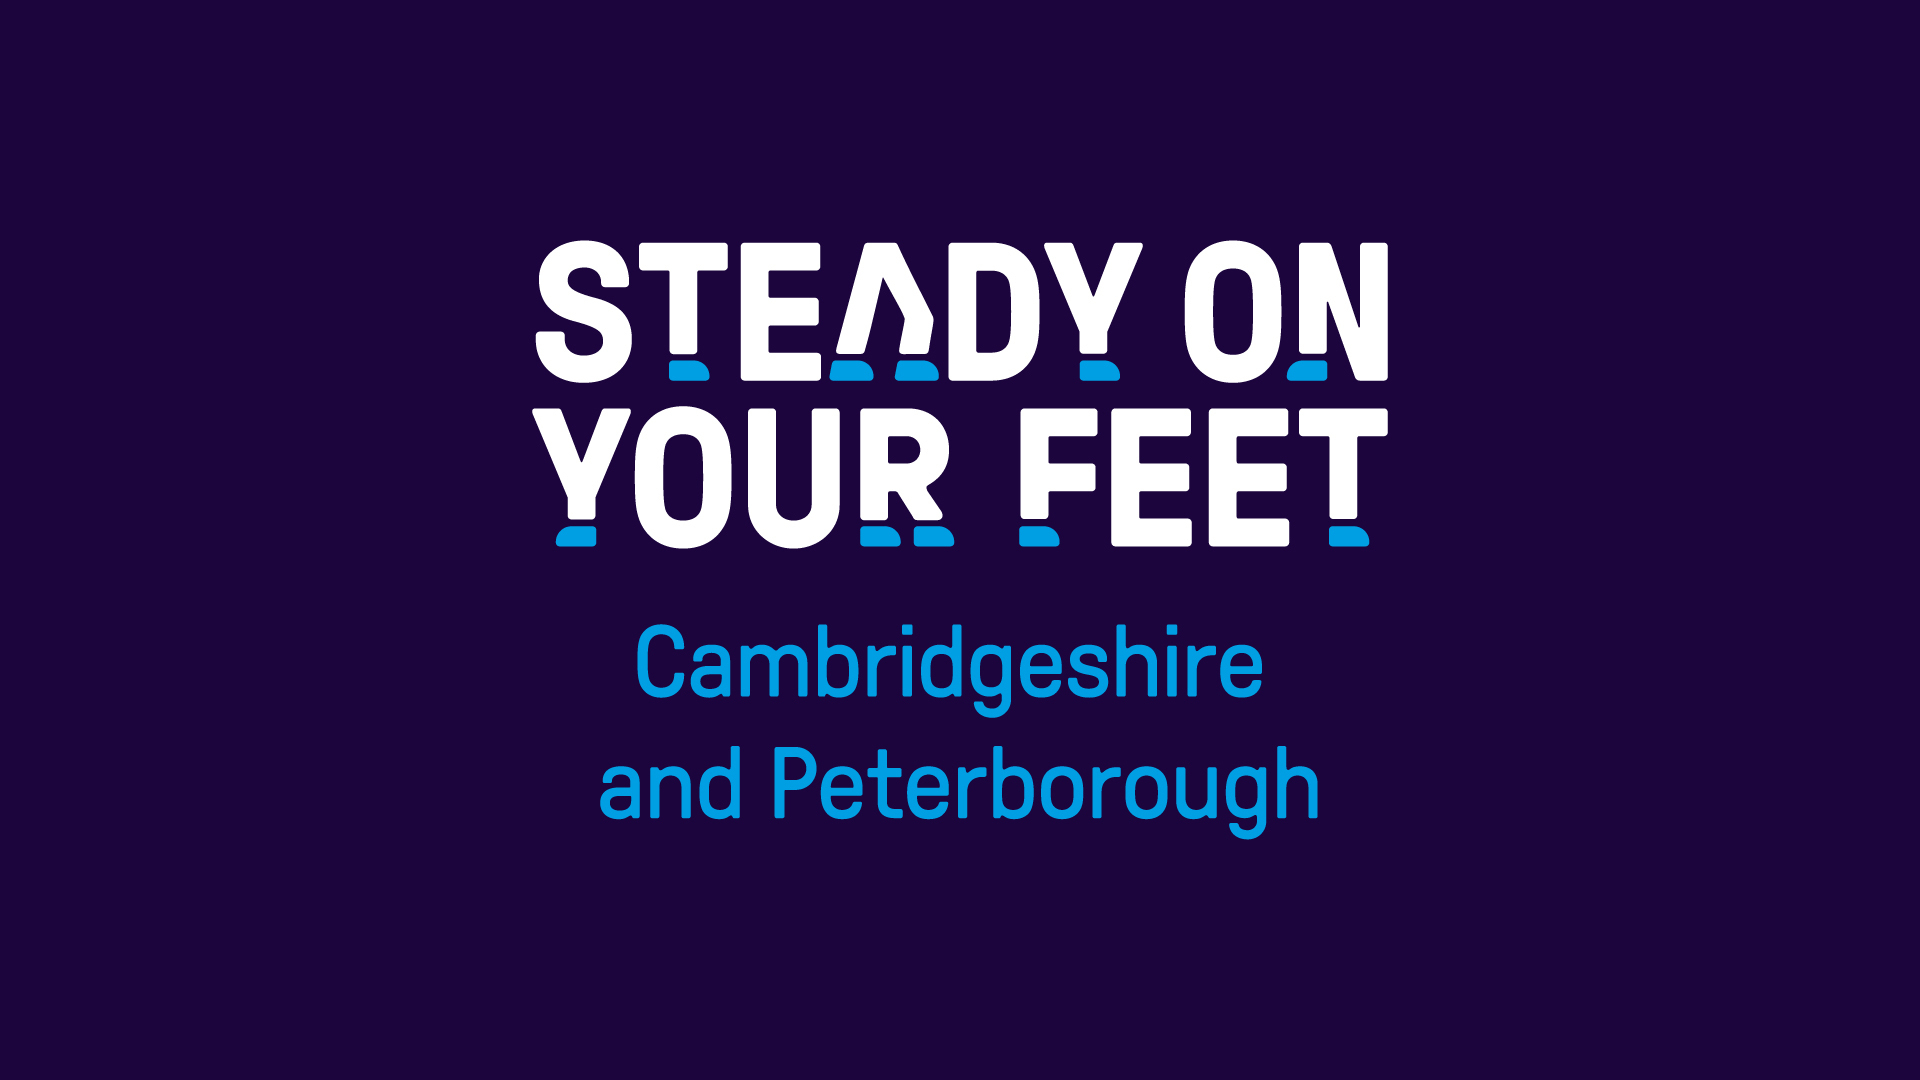 Taking Big Steps to Improve Fall Prevention in Cambridgeshire and Peterborough